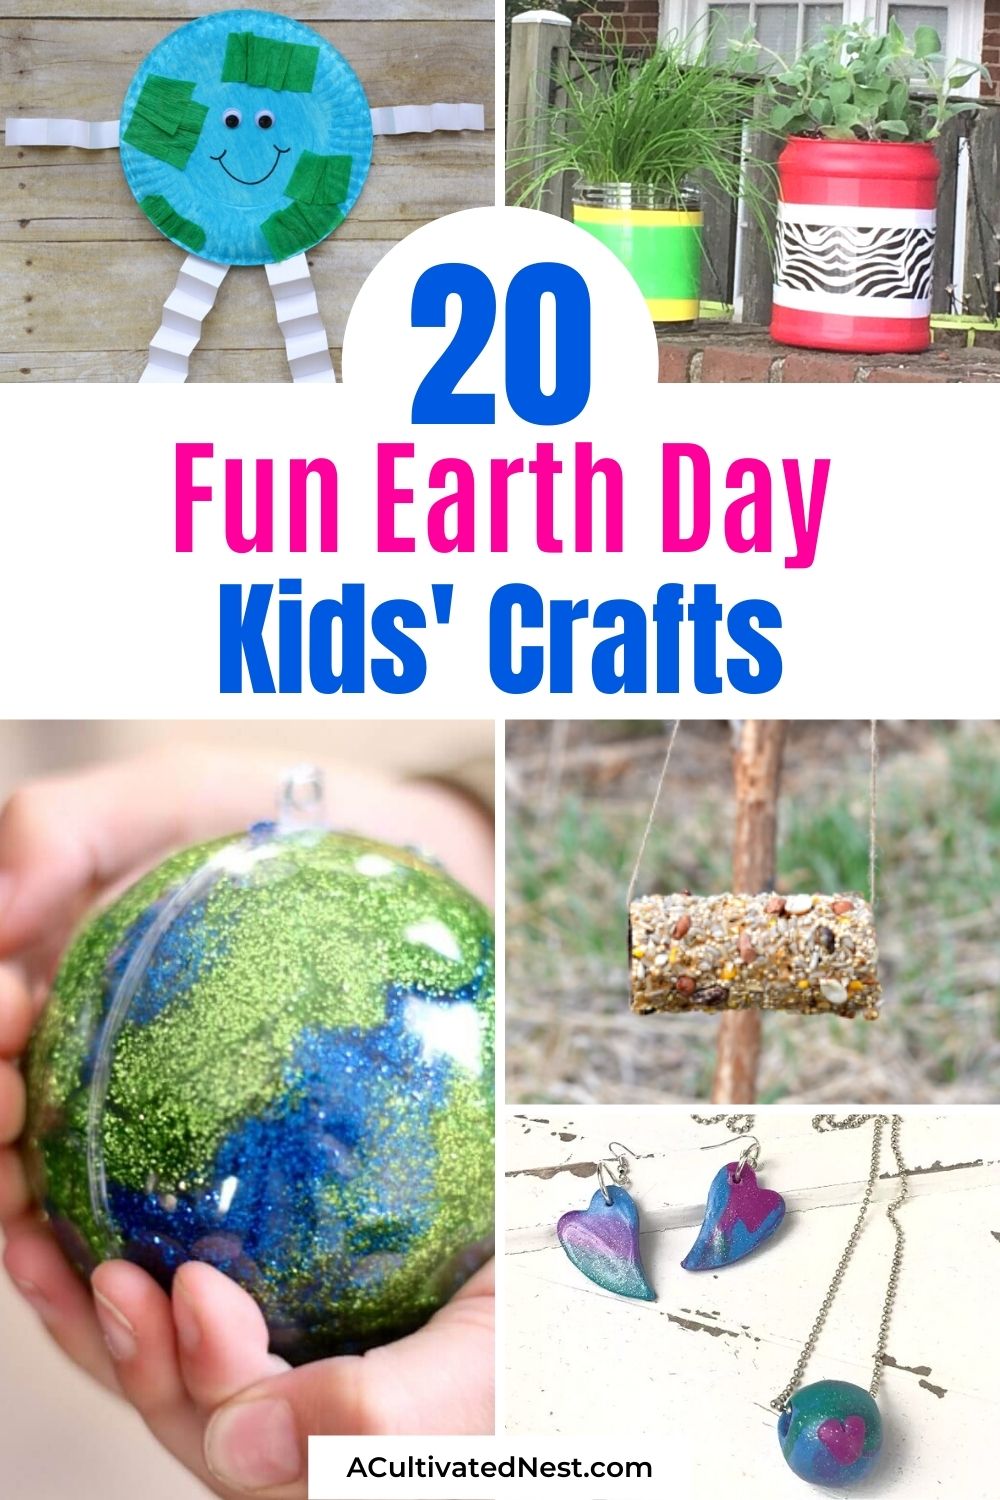 20 Fun Earth Day Kids' Crafts- This Earth Day, teach your children about recycling, upcycling, and taking care of the Earth with a fun craft! There are so many fun Earth Day crafts your kids can do! | #EarthDayCrafts #EarthDay #kidsCrafts #kidsActivities #ACultivatedNest